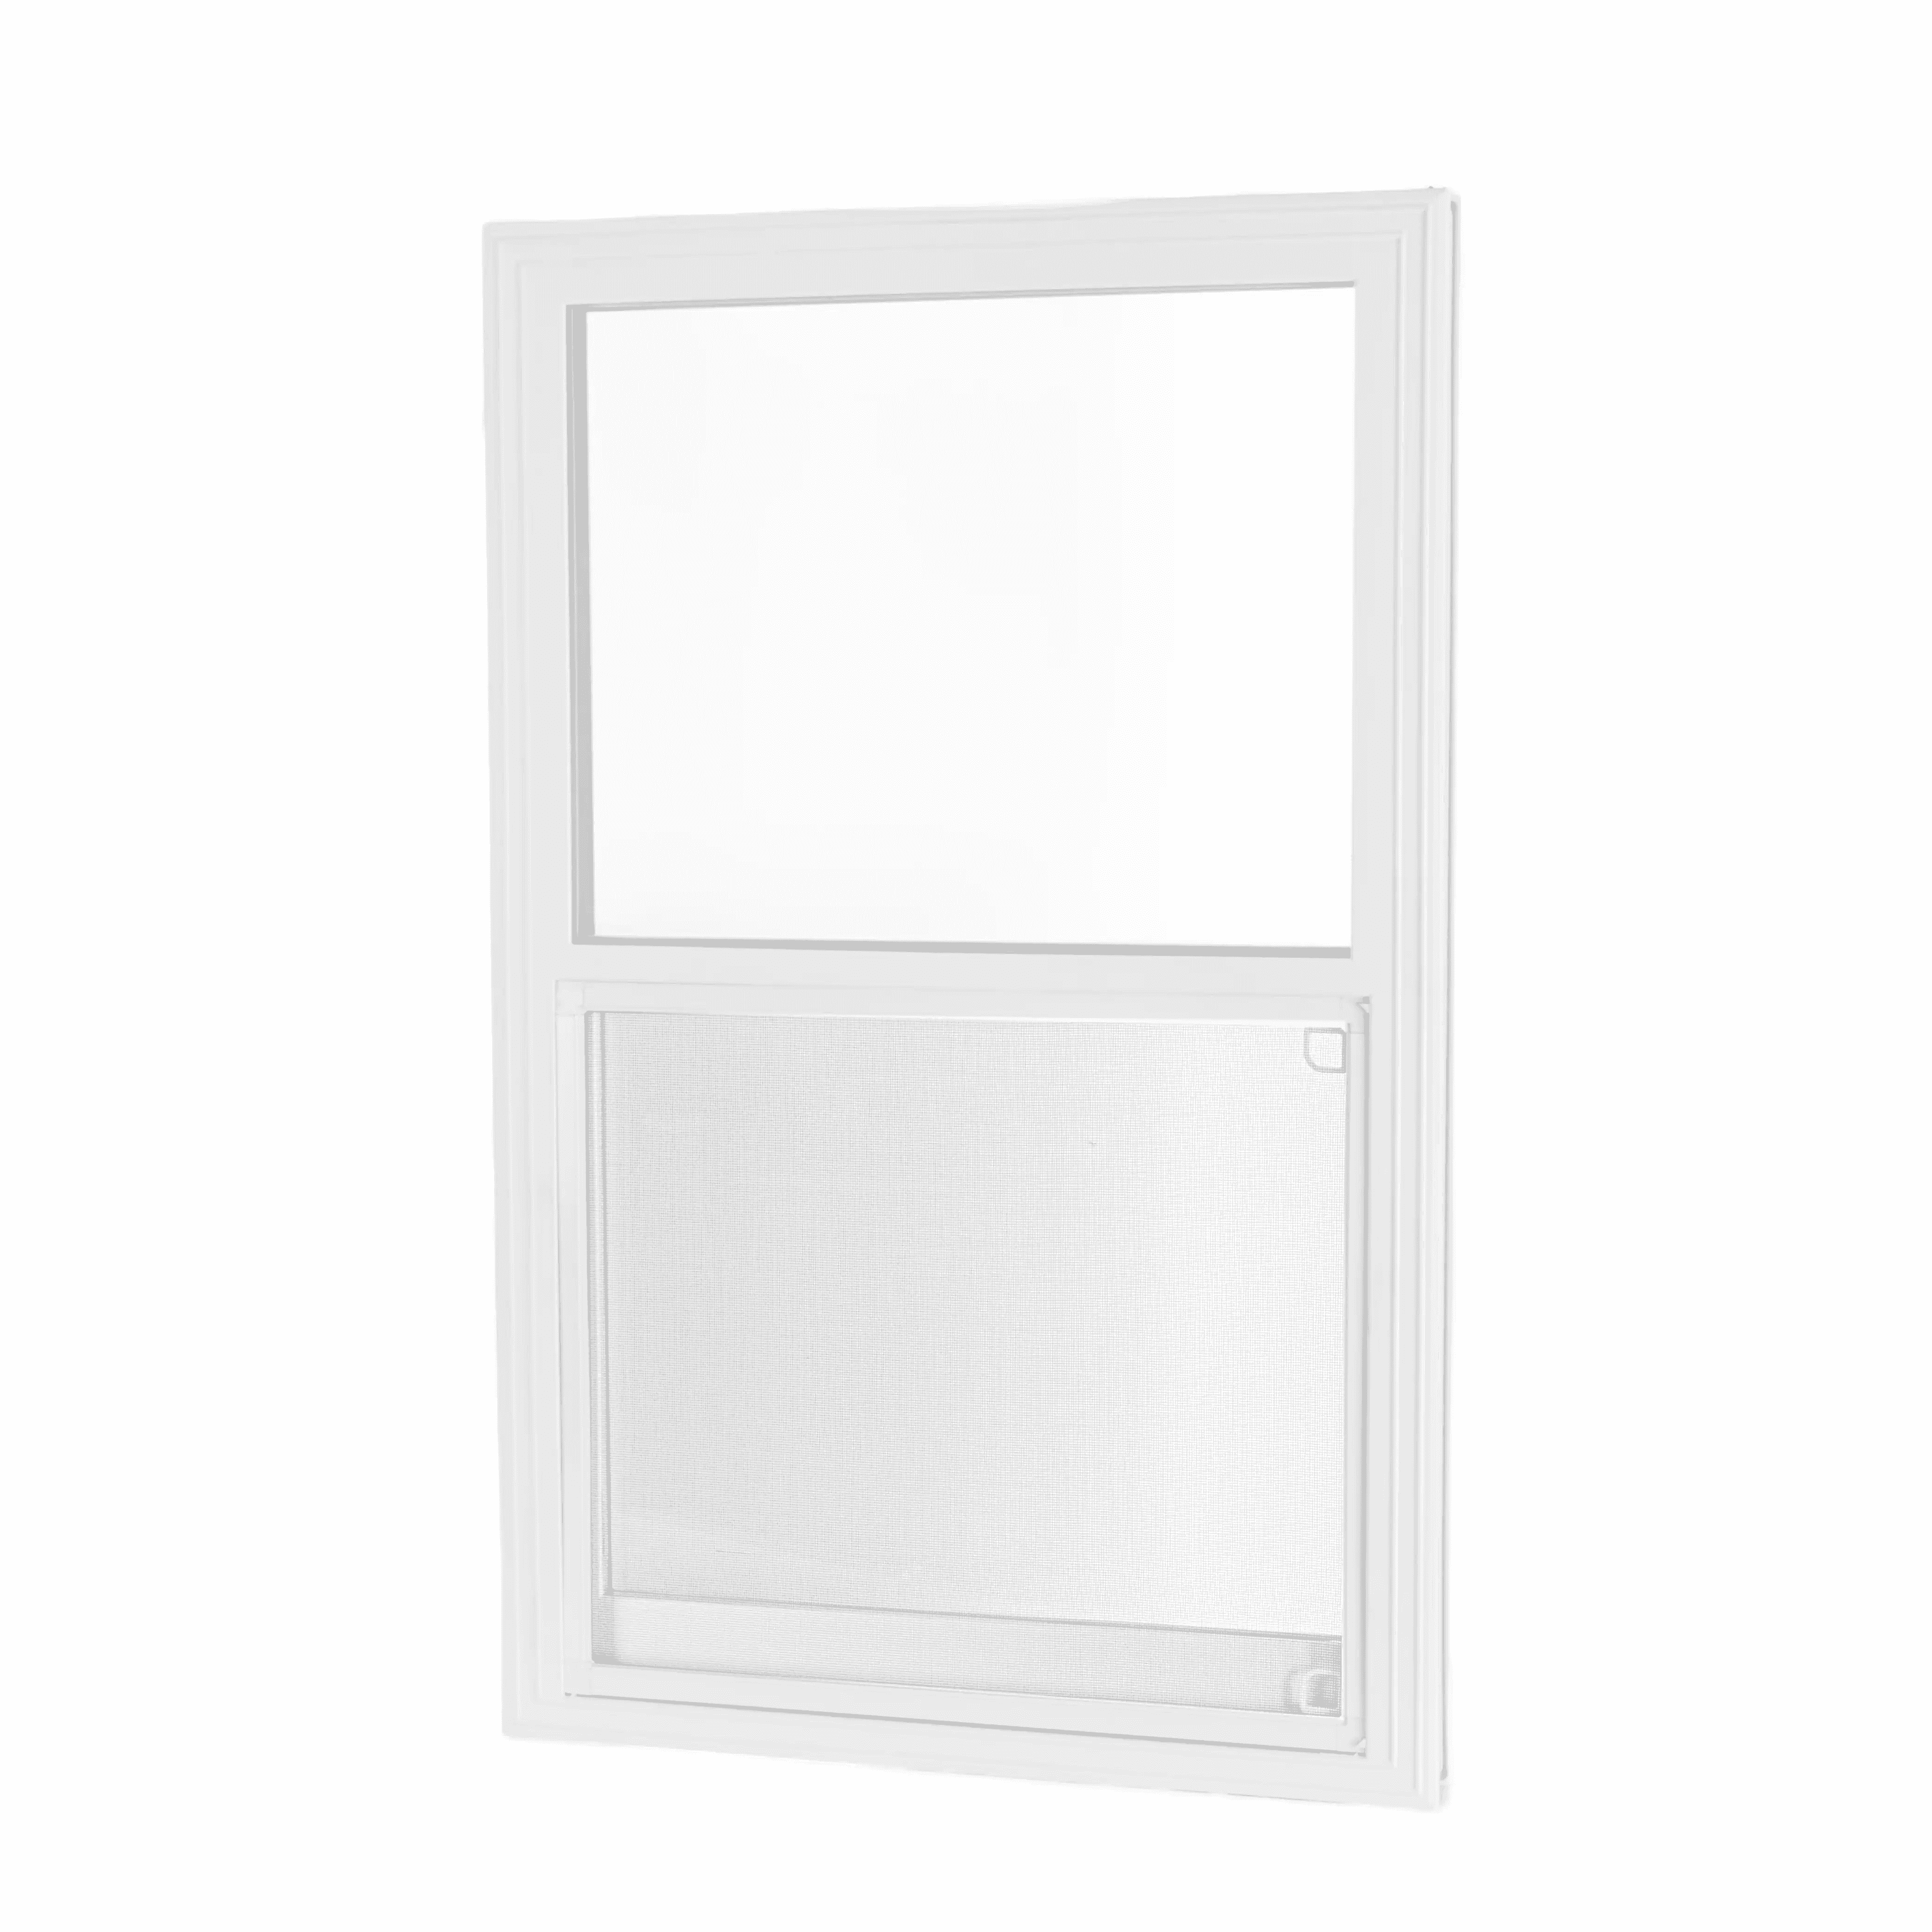 Venting Low-E Glass Insert For Doors